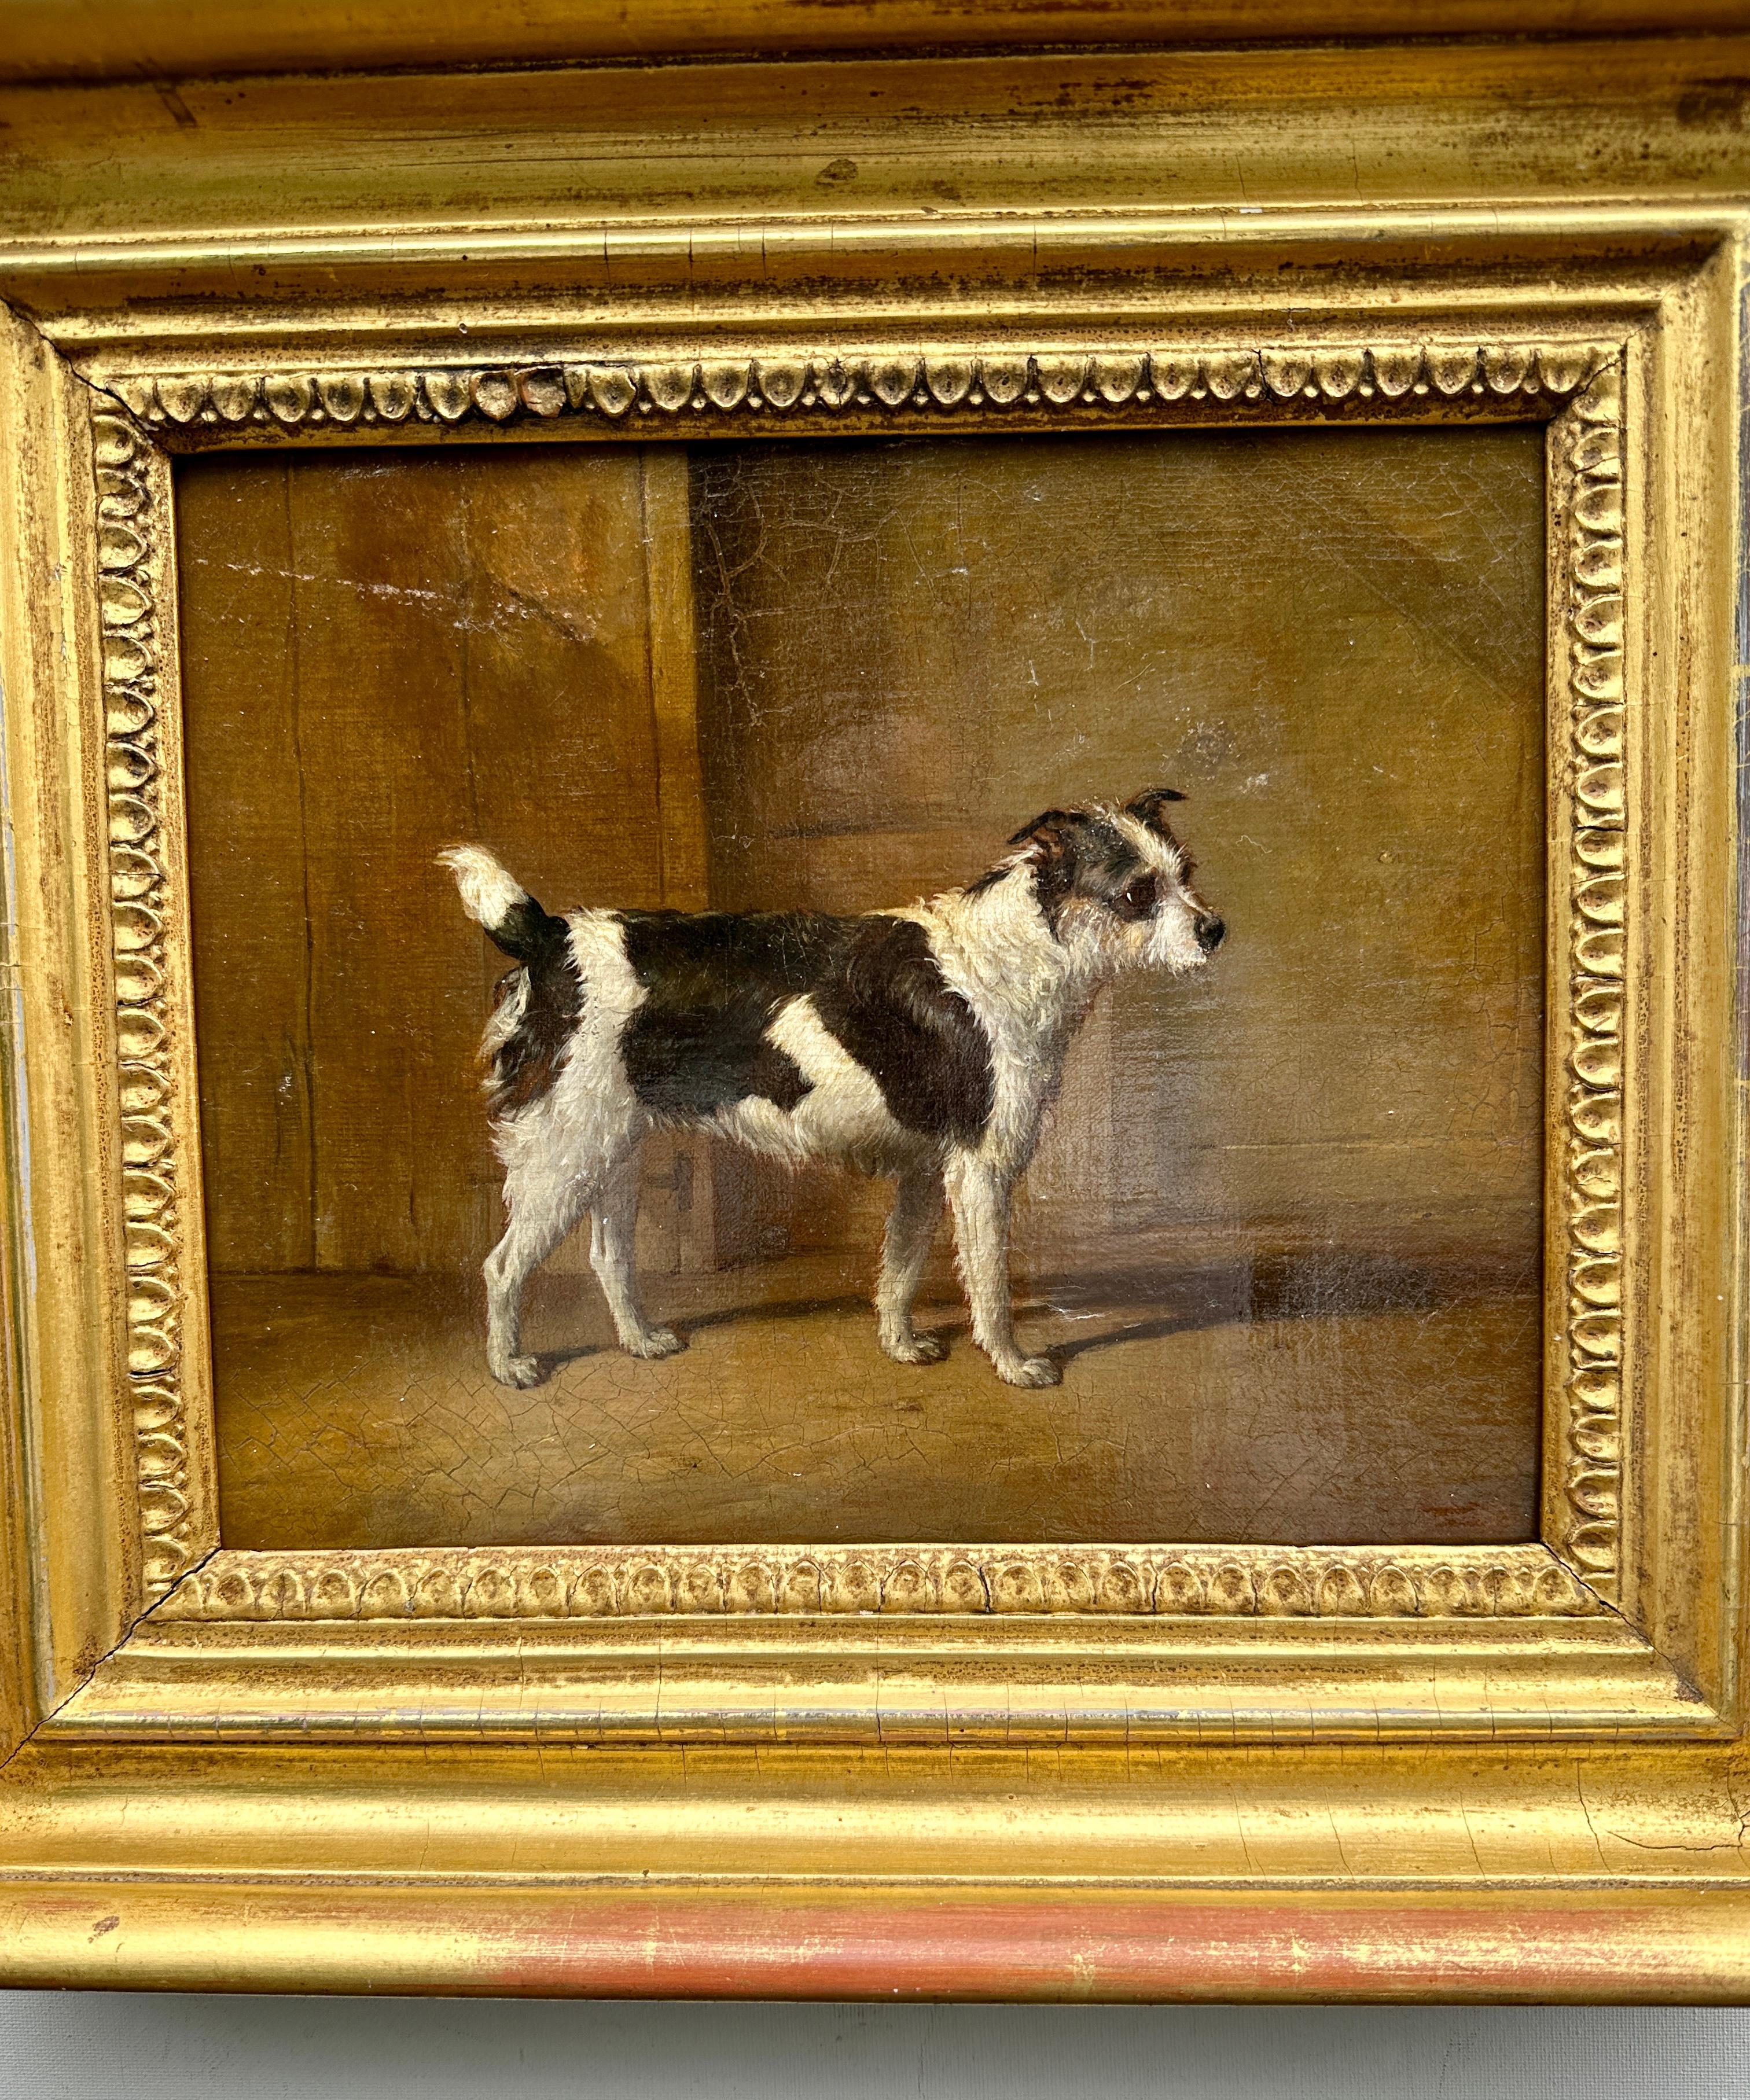 19th century English portrait of a terrier dog in an interior - Painting by Ben Marshall